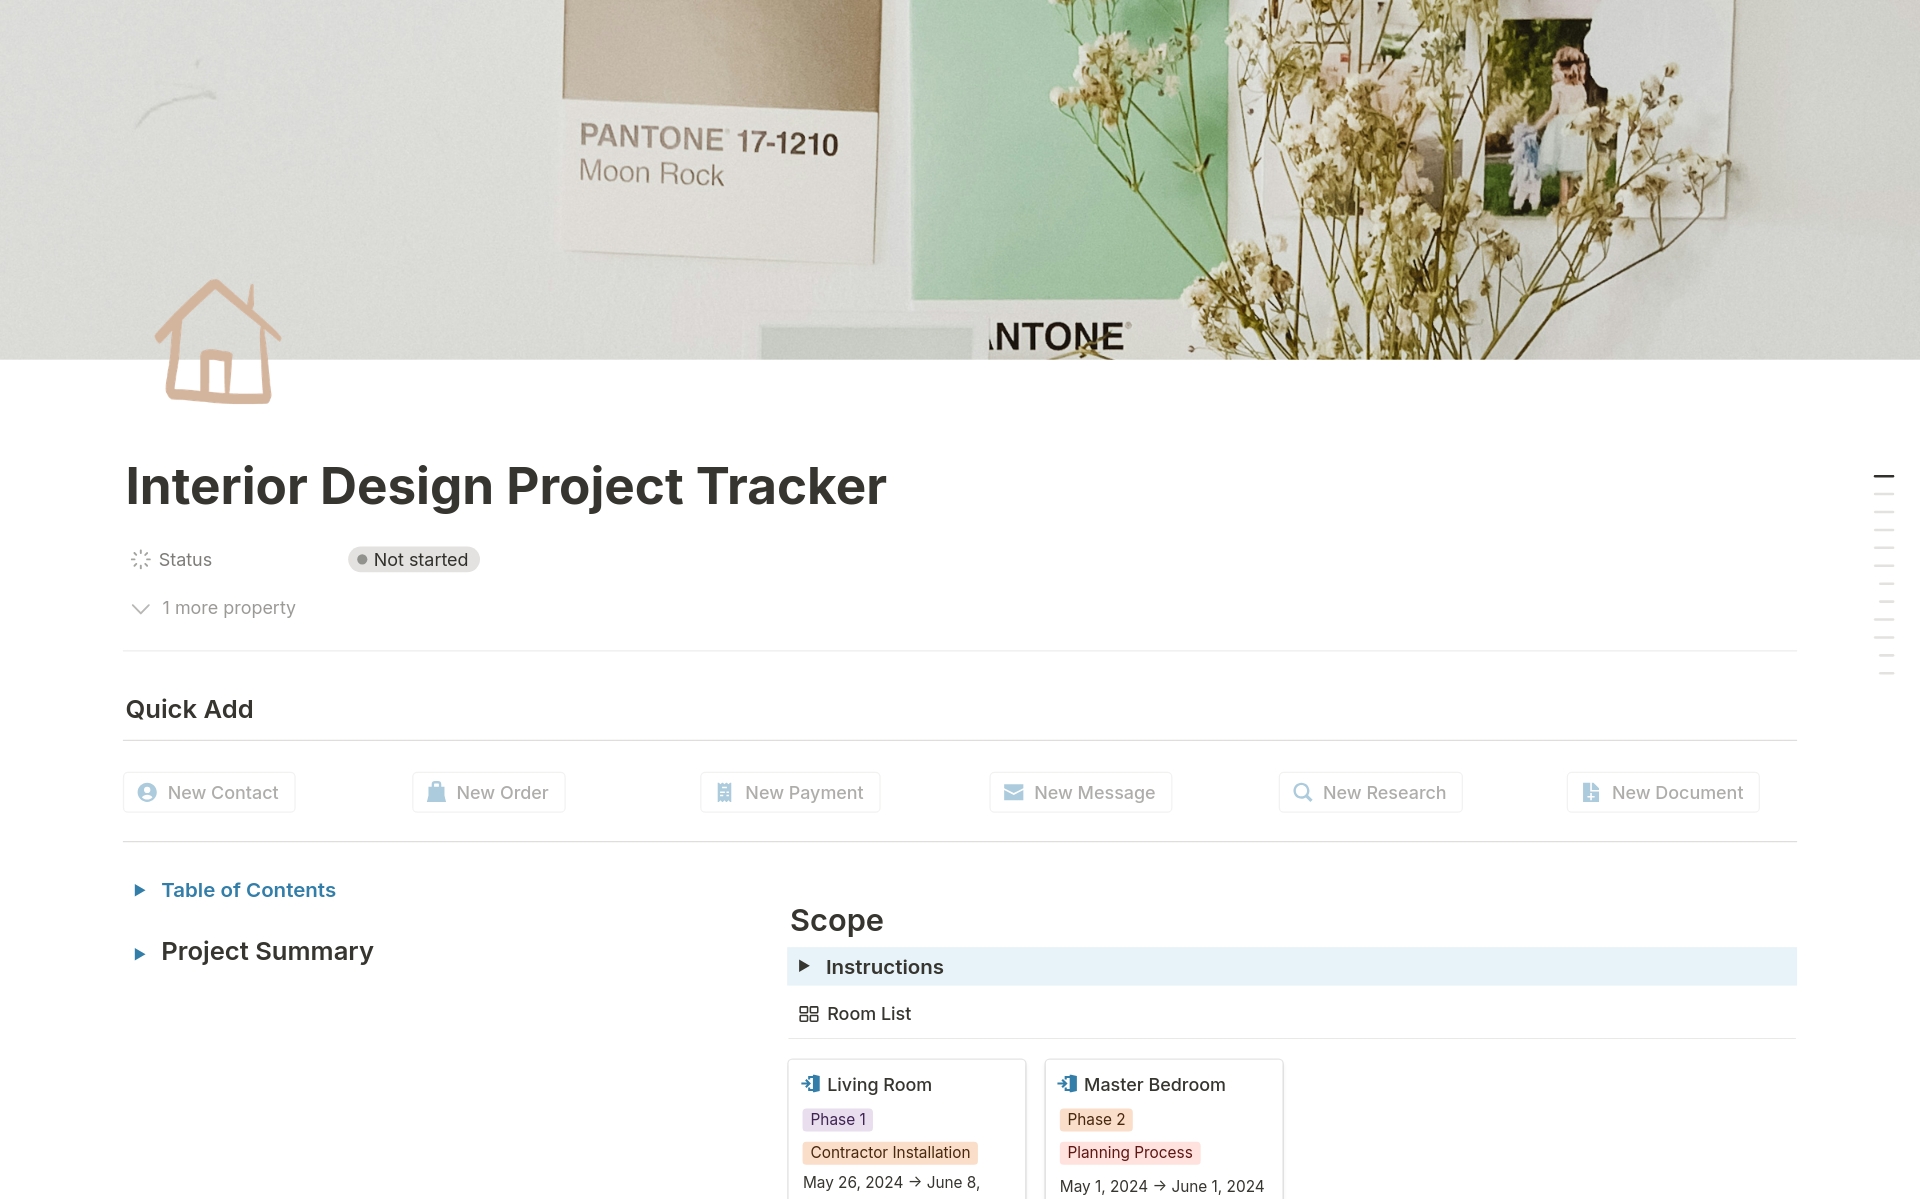 Interior Design All-In-One Project Planning Tracker seamlessly integrates procurement, resource library, task management, income tracking, and calendar into one dynamic dashboard. 